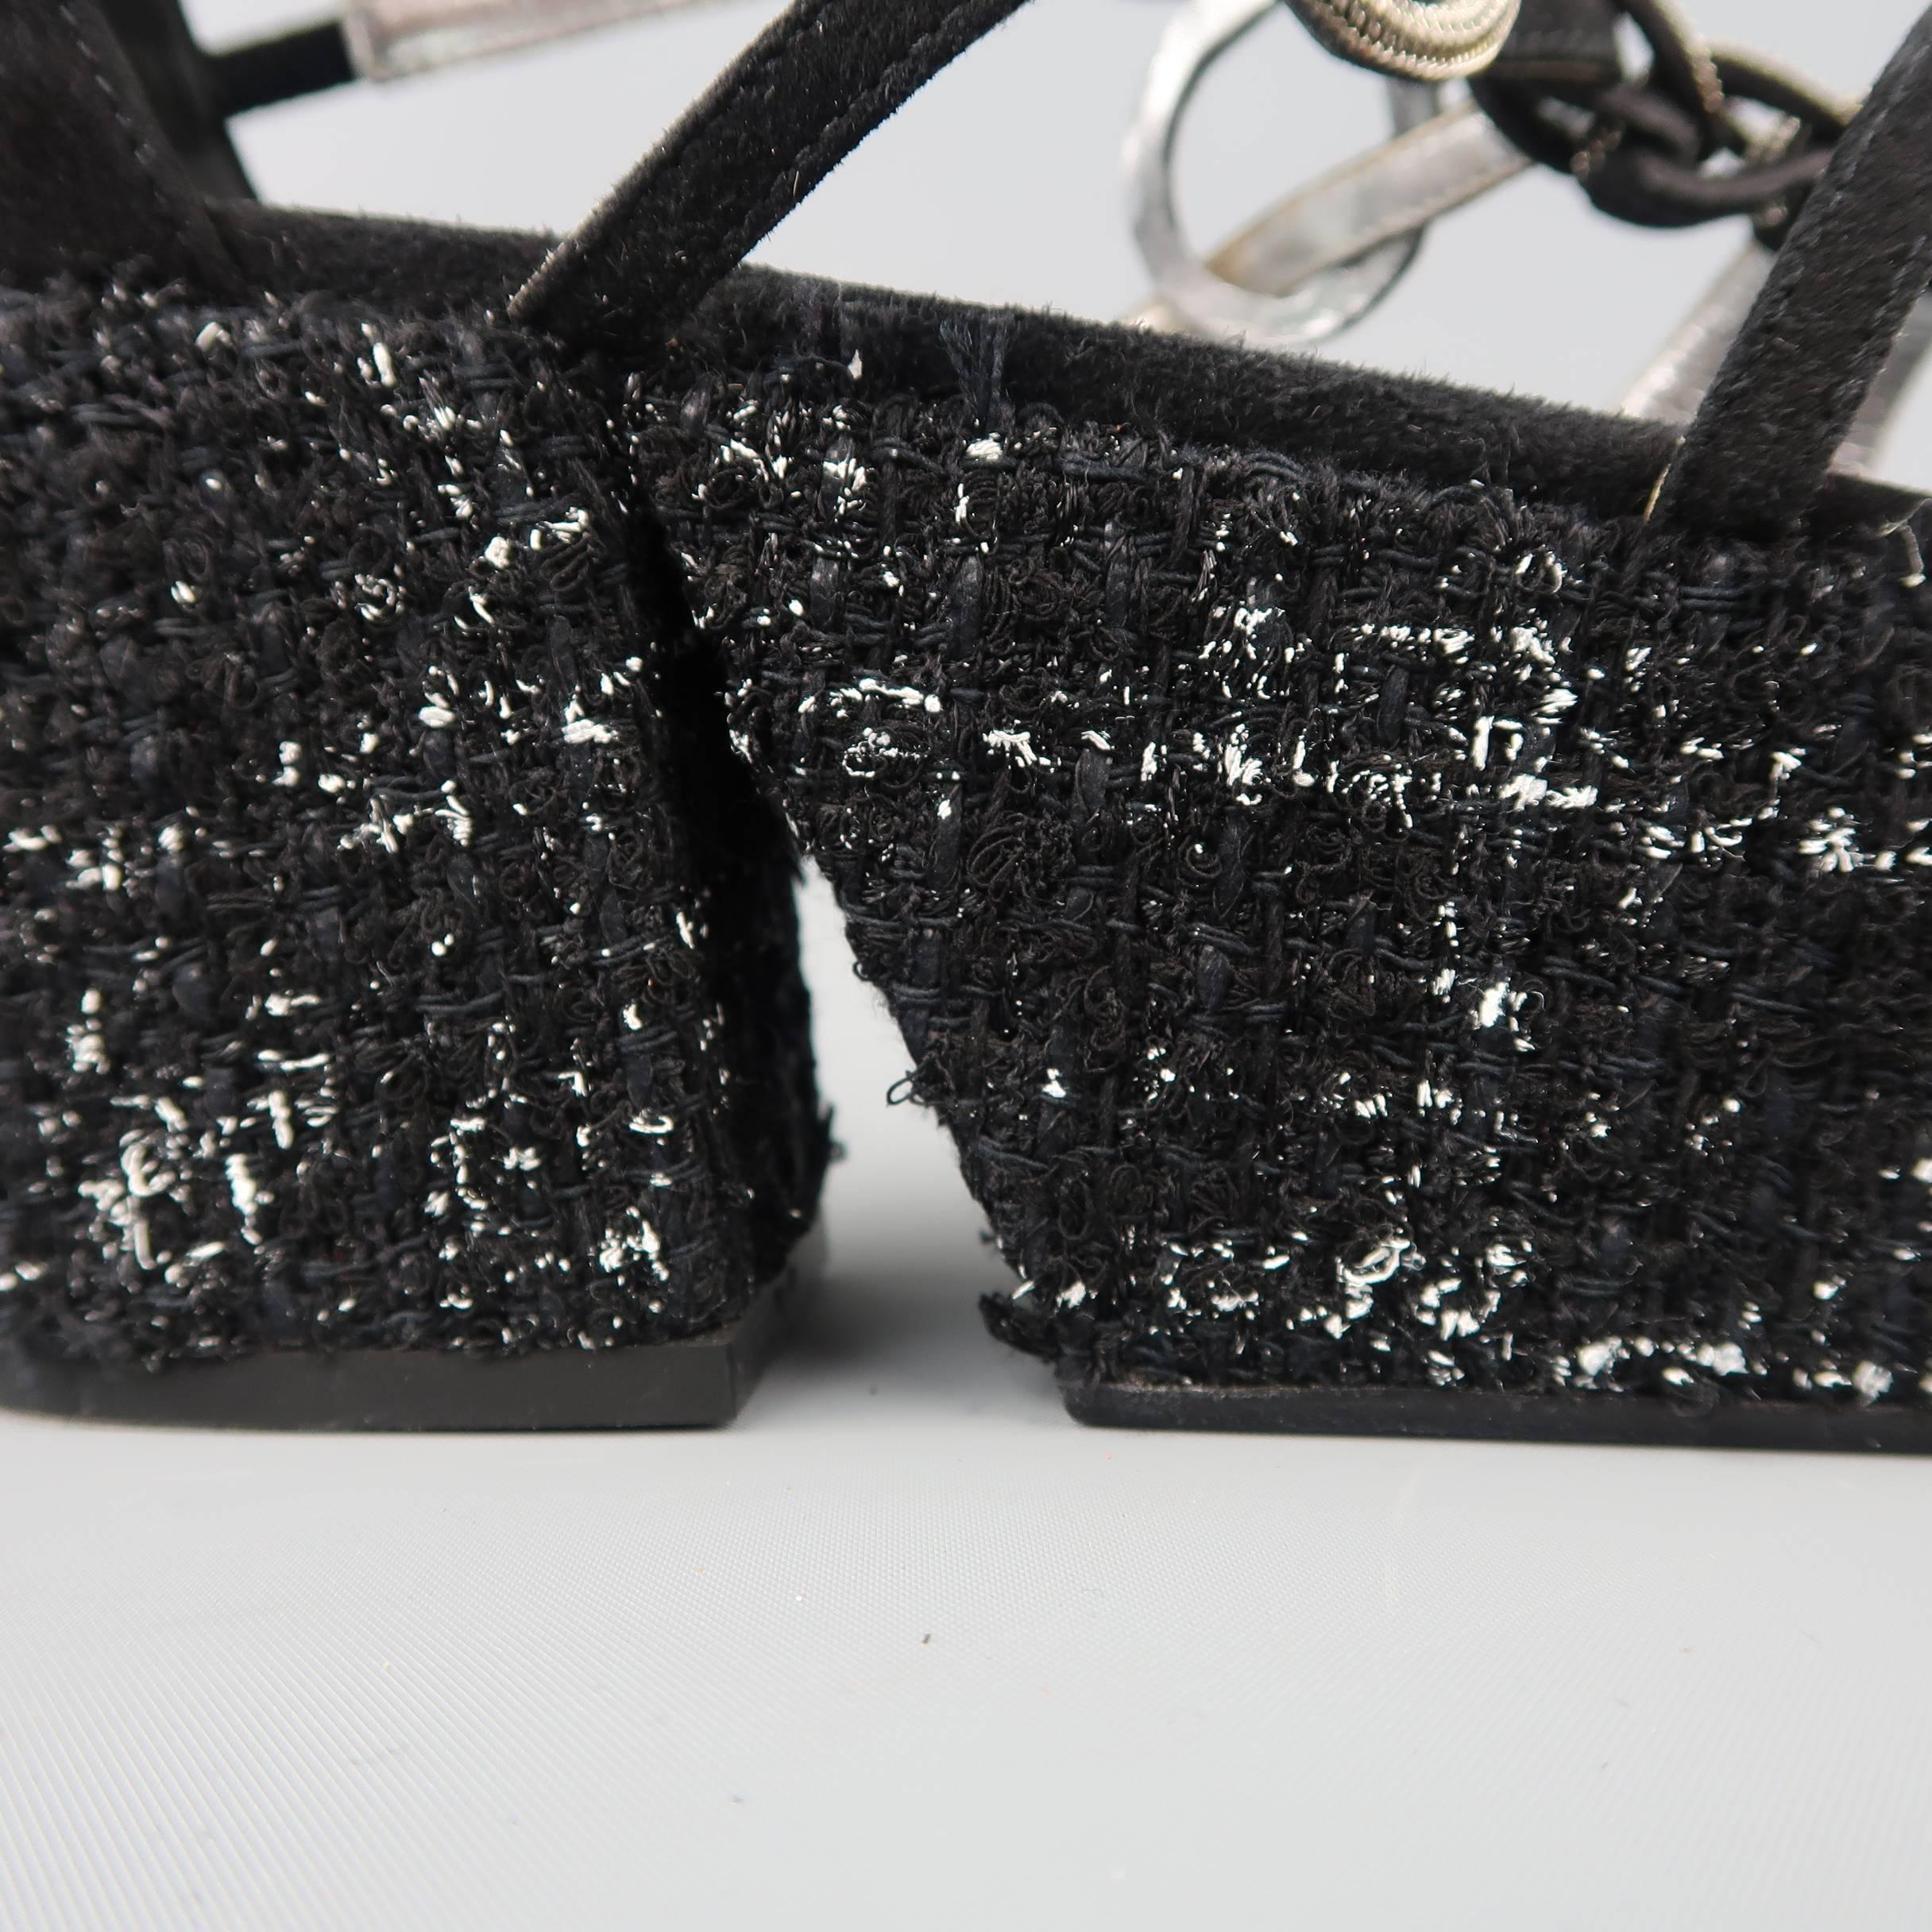 CHANEL gladiator style sandals come in black suede with metal details and thick tweed covered platform wedge sole. Made in Italy.
 
Good Pre-Owned Condition.
Marked: IT 40
 
Measurements:
 
Heel: 3 in.
Platform: 2 in.
